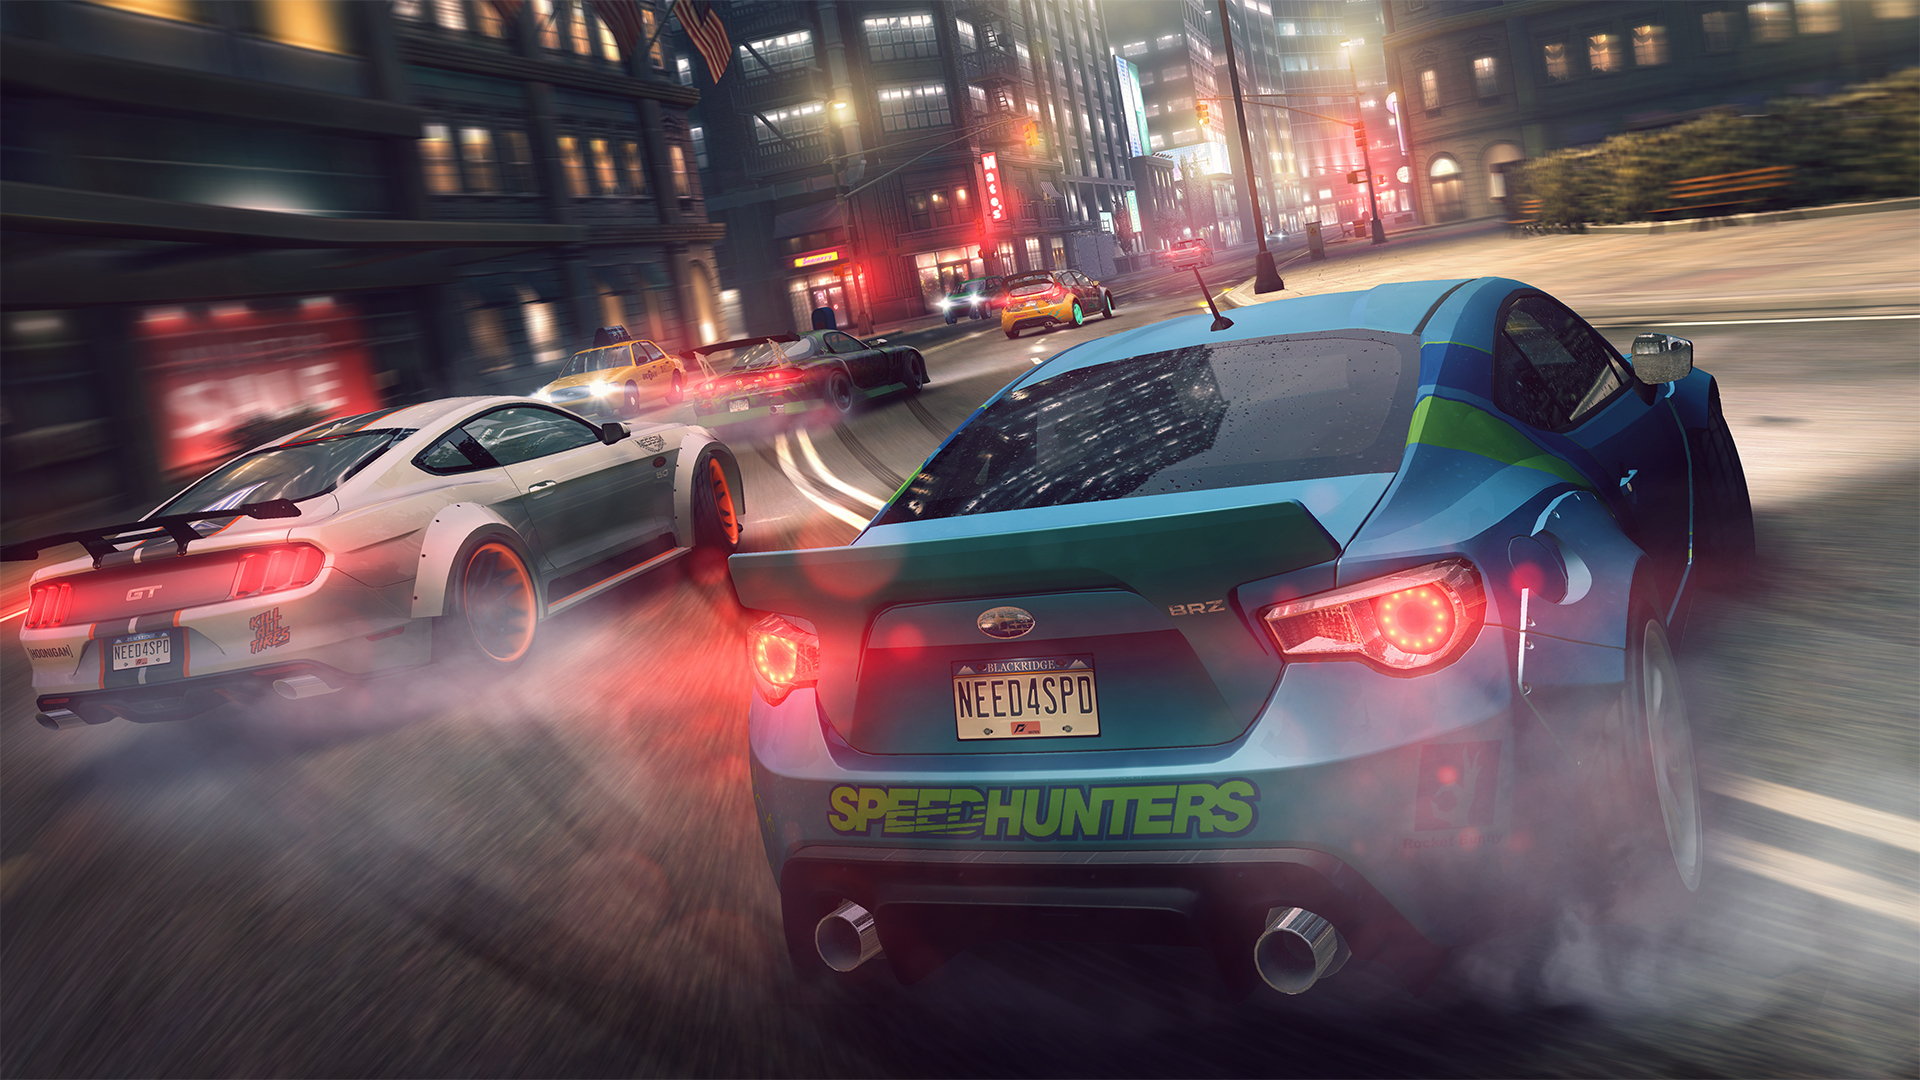 need for speed no limits pc download